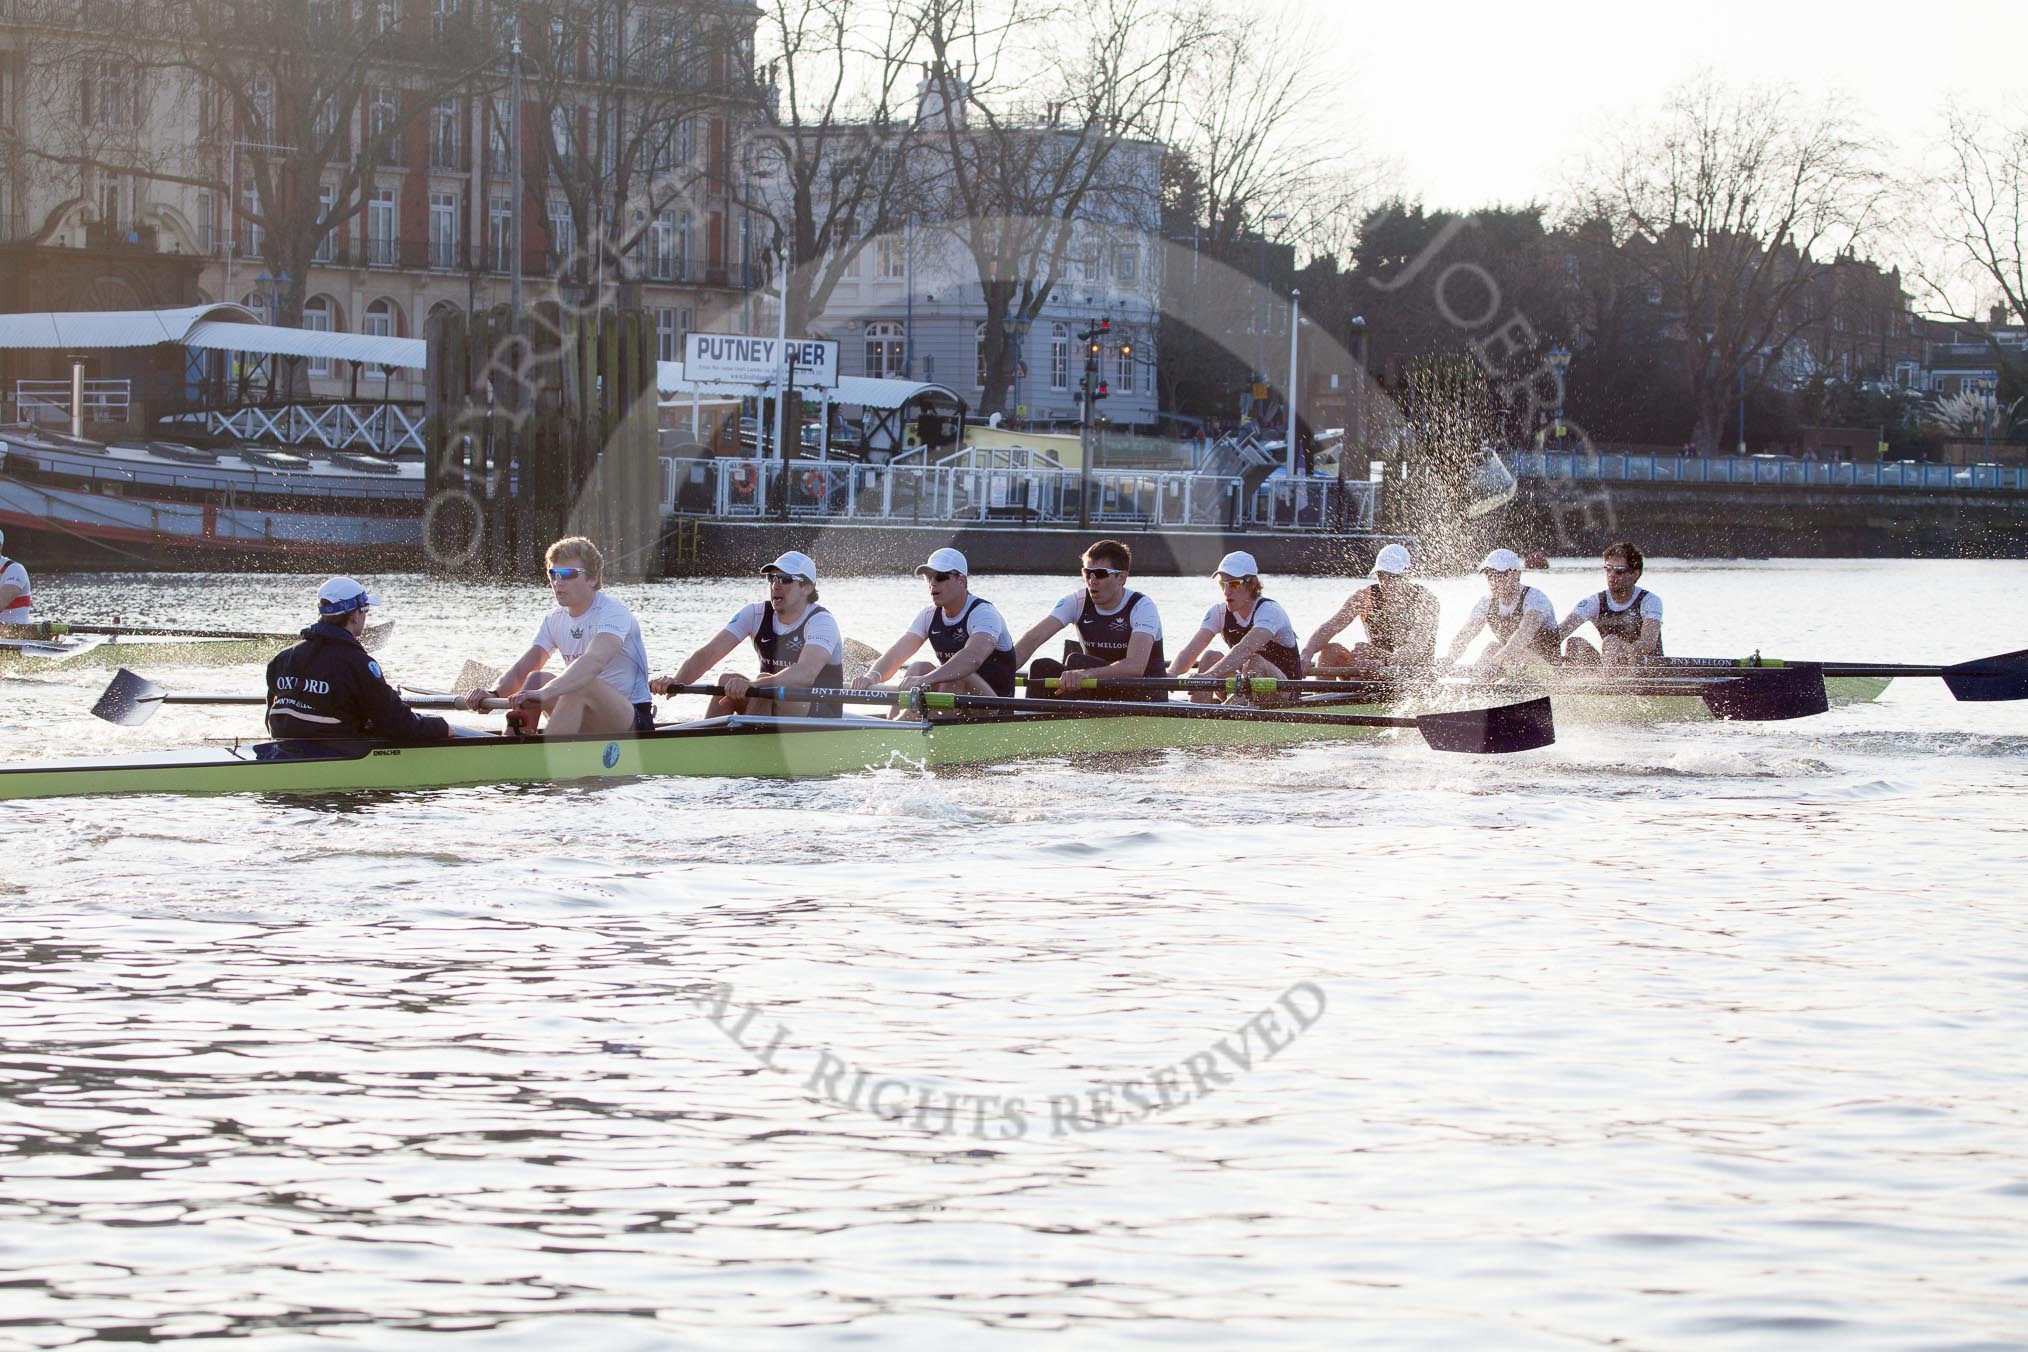 The Boat Race season 2014 - fixture OUBC vs German U23: The race is on - the German U23-boat, on the left, and the OUBC boat approaching Putney Pier..
River Thames between Putney Bridge and Chiswick Bridge,



on 08 March 2014 at 16:45, image #34